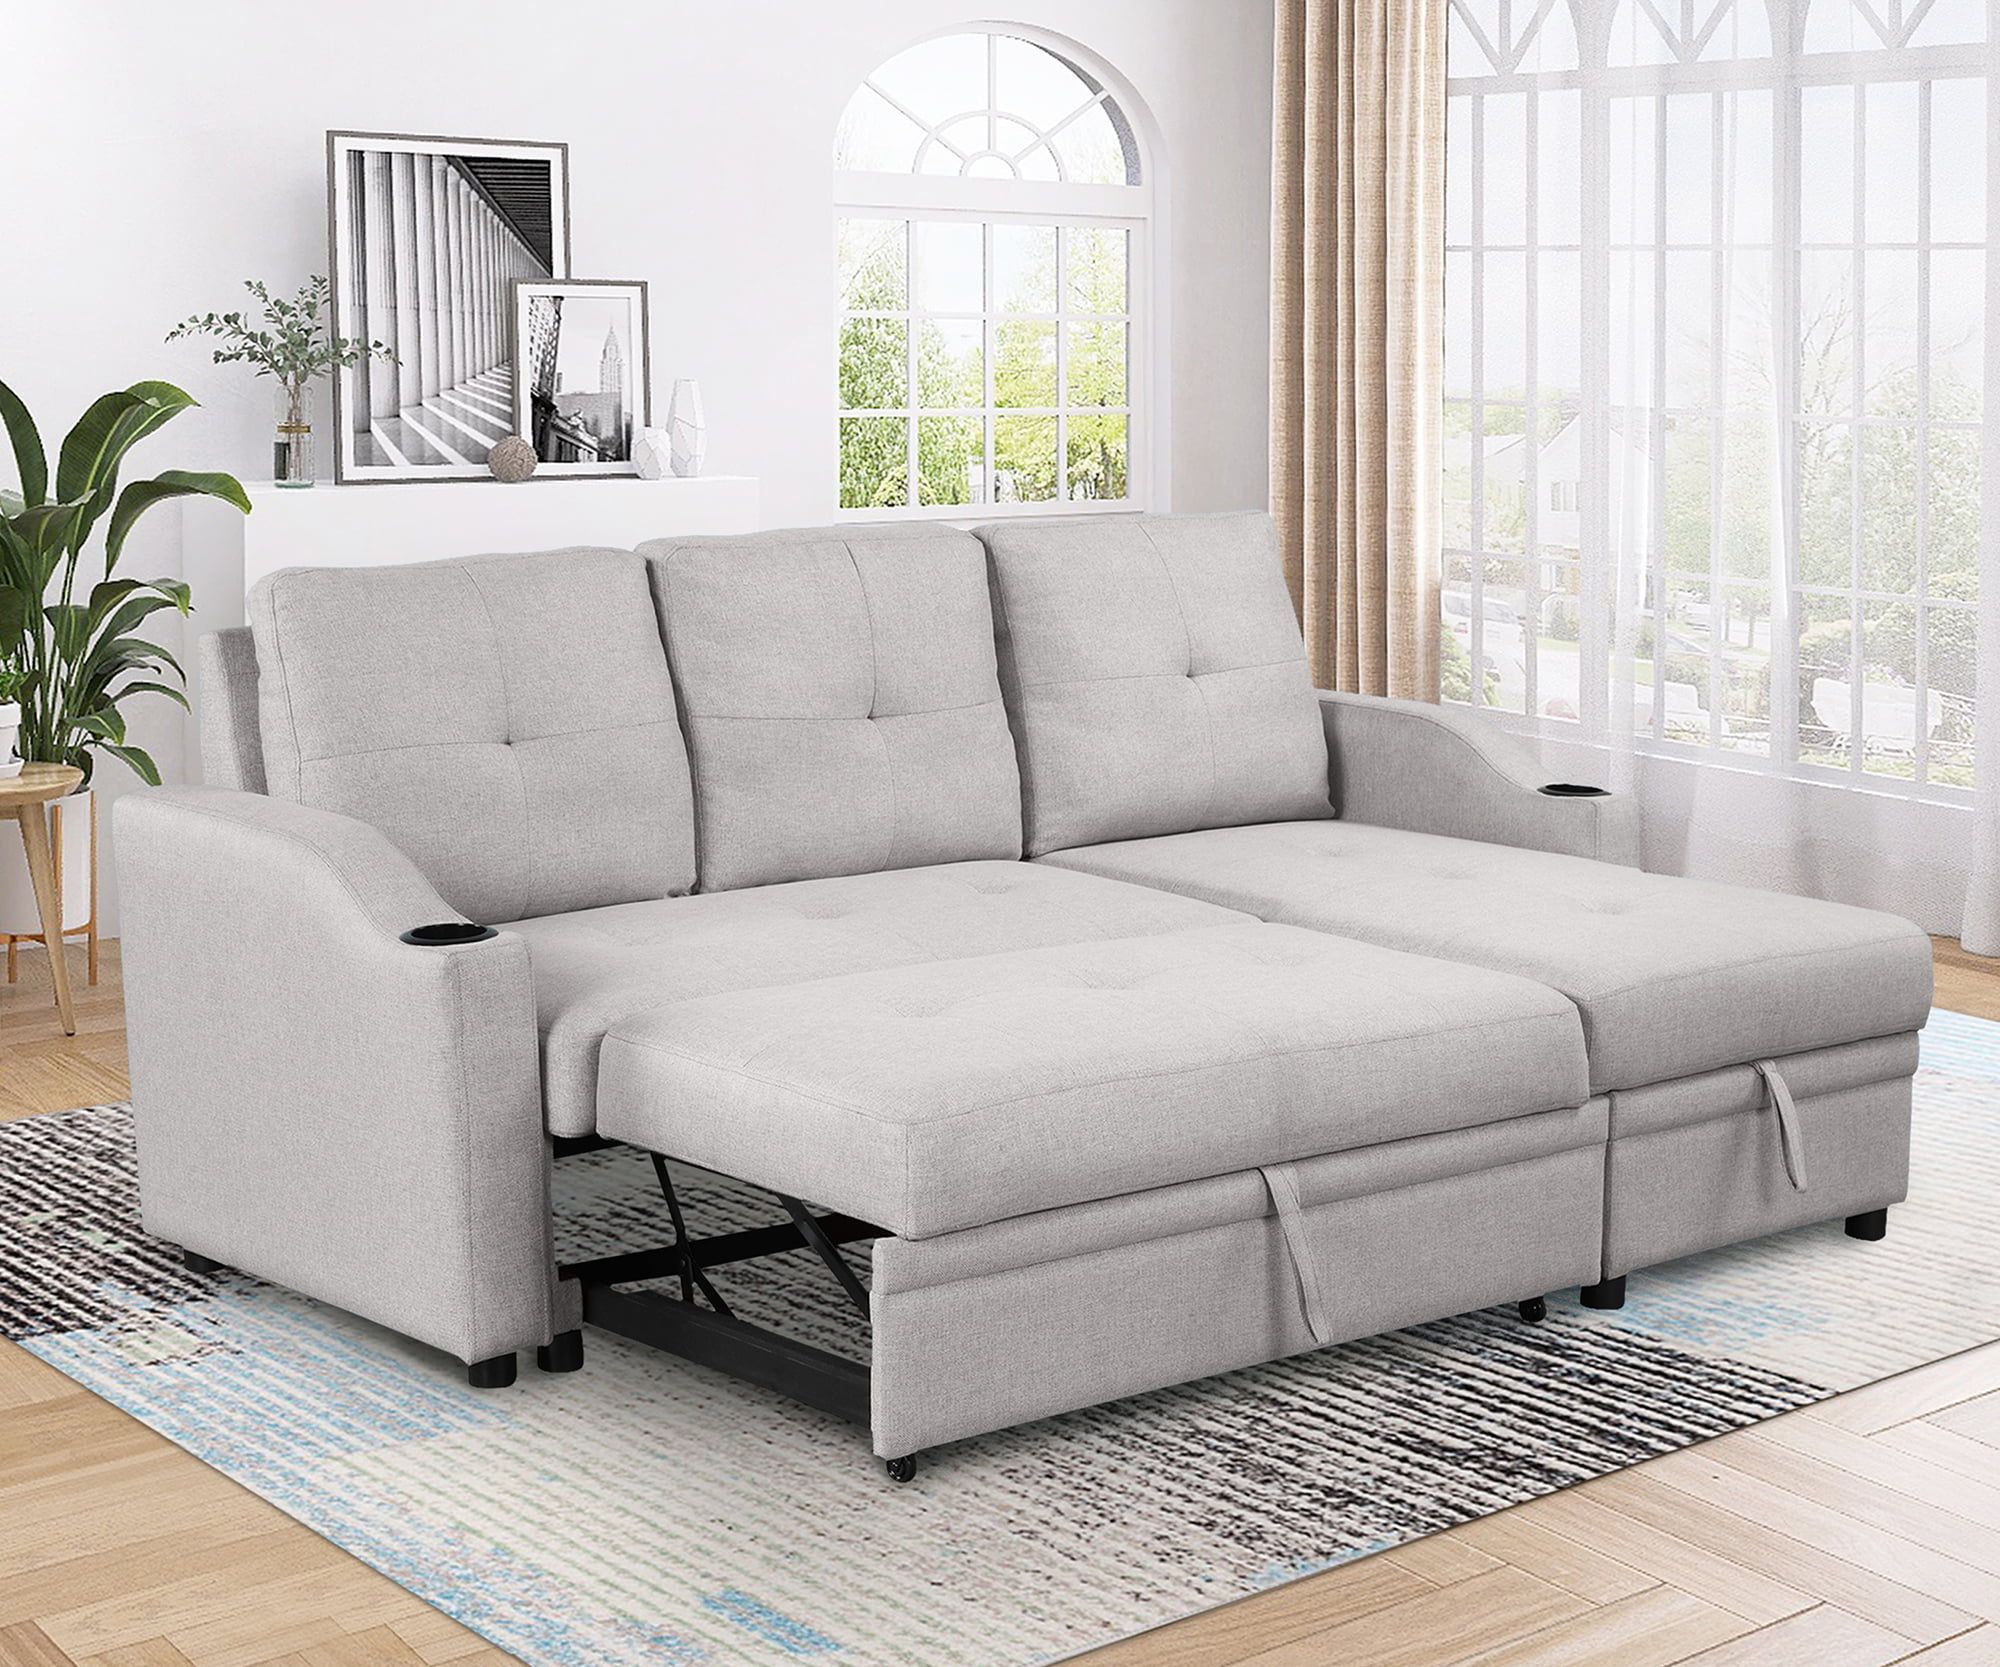 Churanty Pull Out Bed Sleeper Sectional Sofa Upholstery Reversible Couch  With Storage Chaise Cup Holder For Small Spaces,Gray – Walmart Within Reversible Pull Out Sofa Couches (Photo 2 of 15)